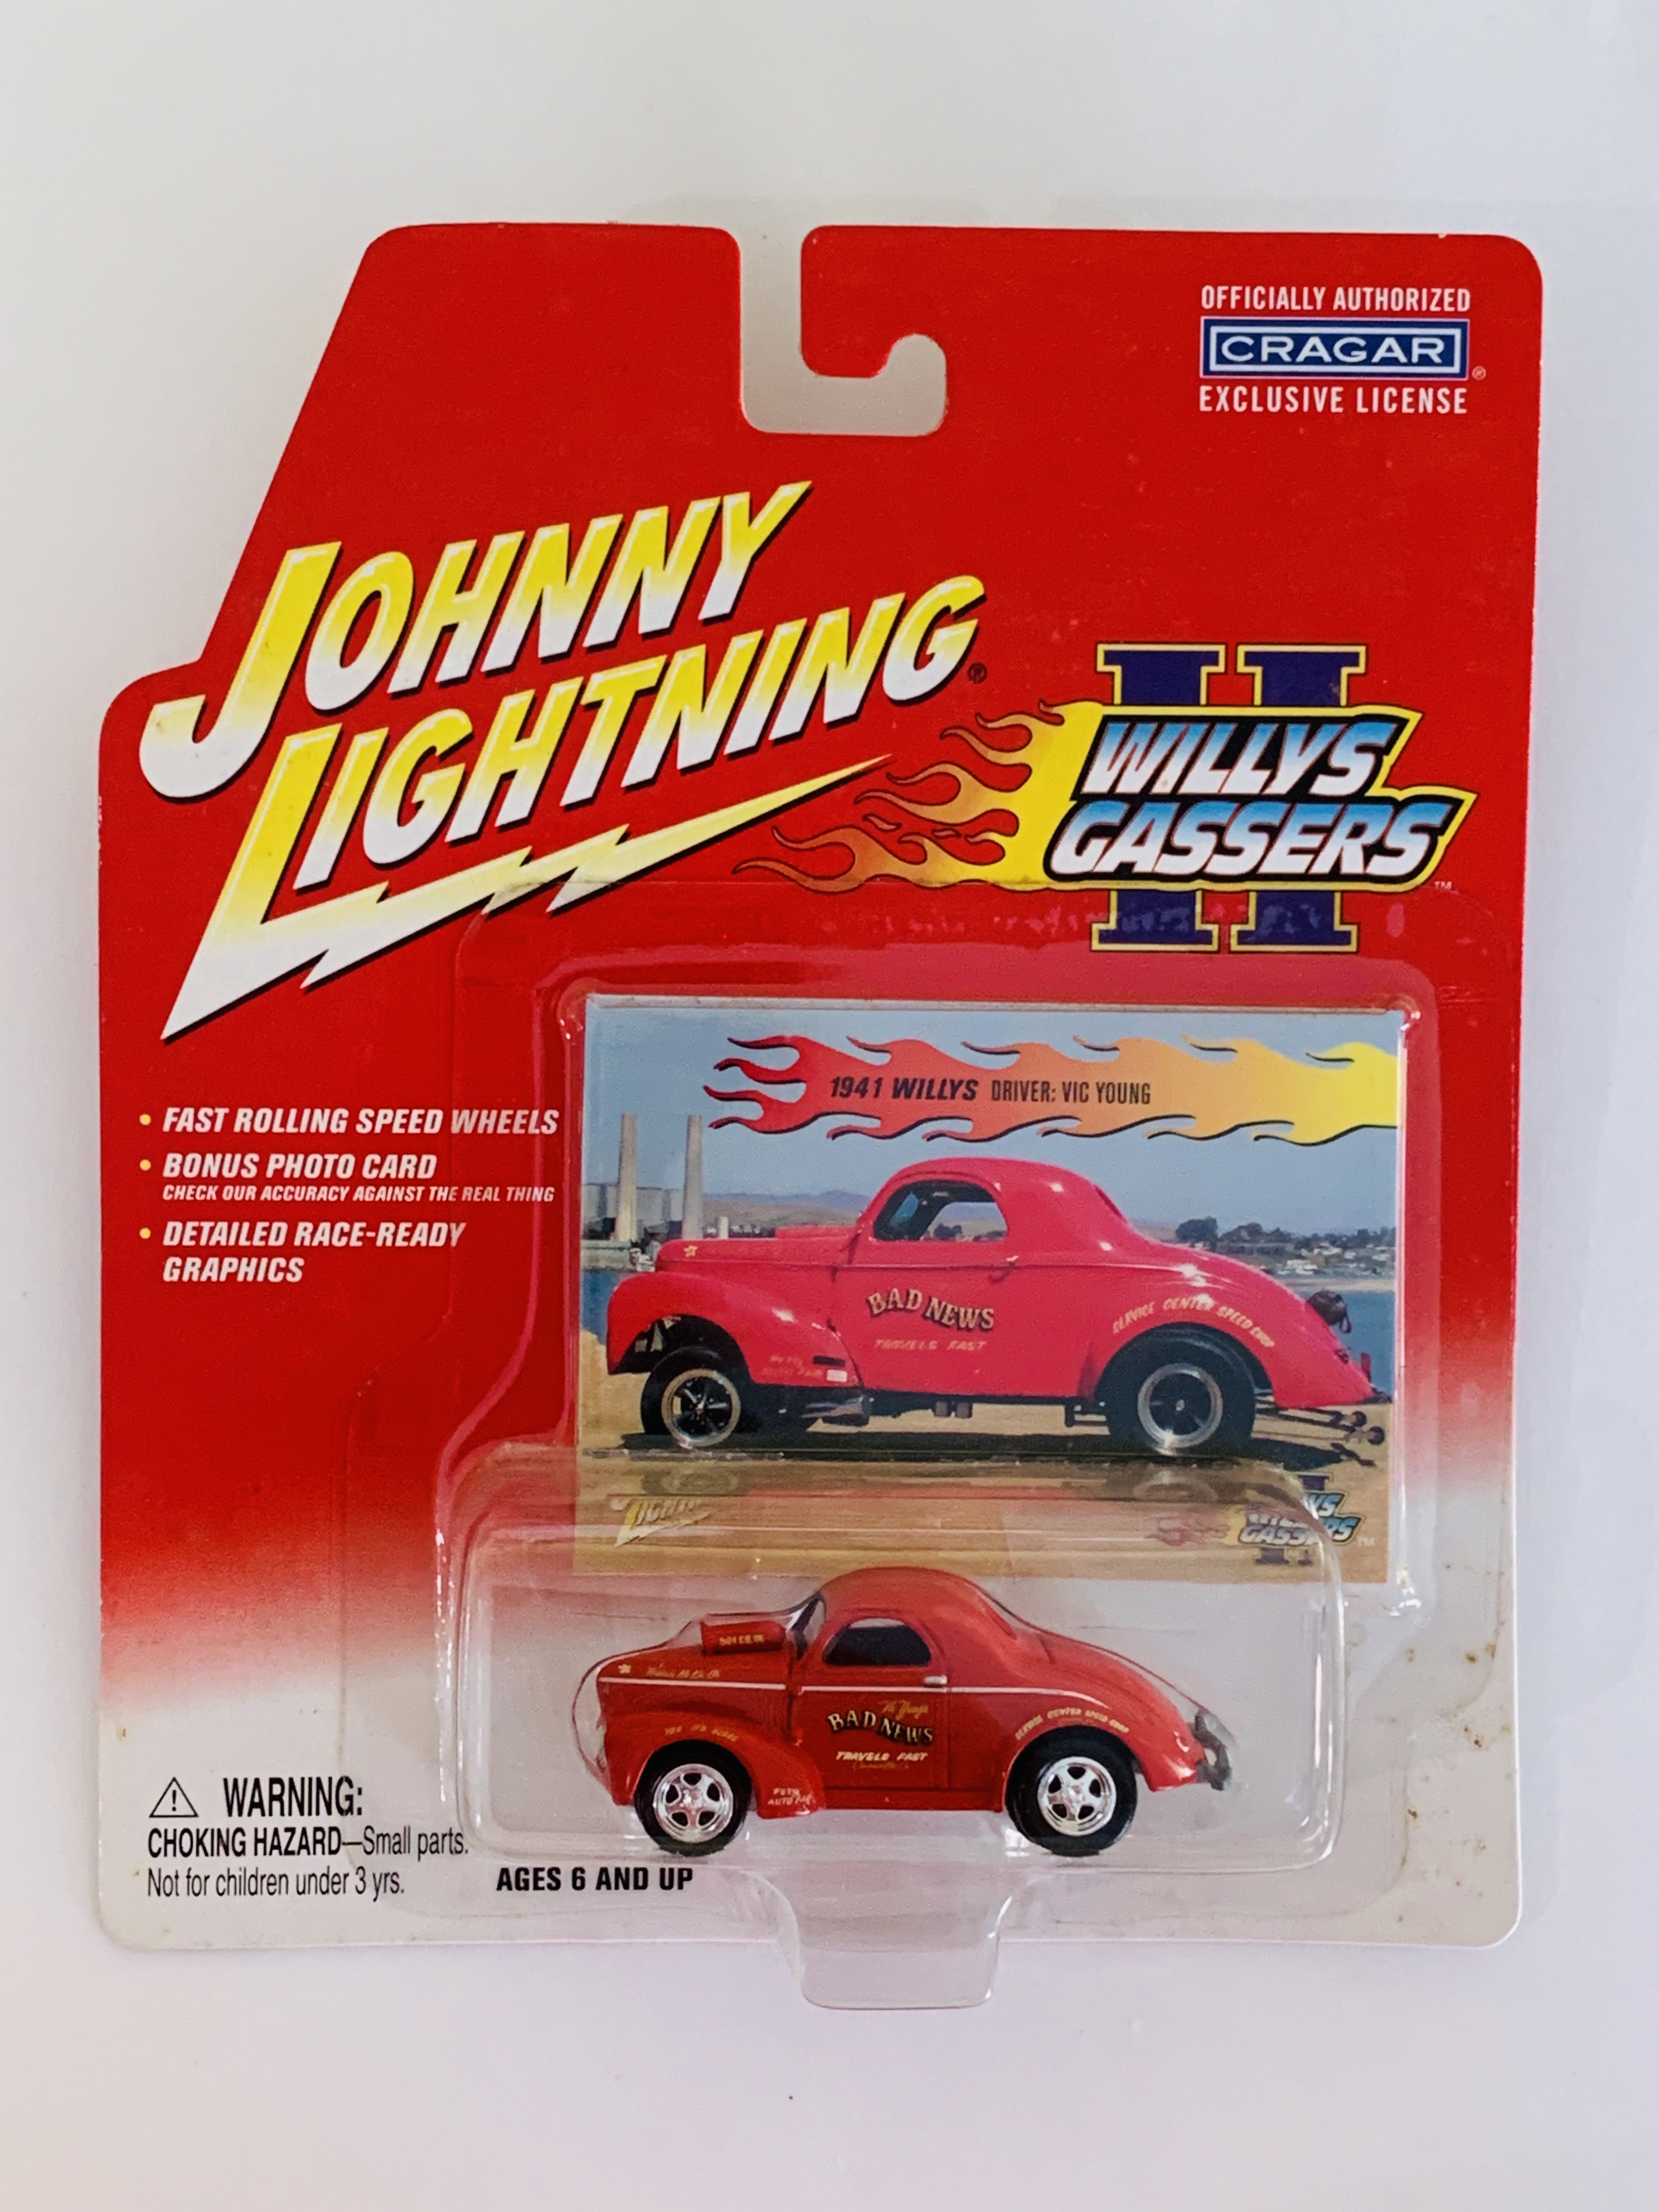 Johnny Lightning Willys Gassers II 1941 Willys Vic Young